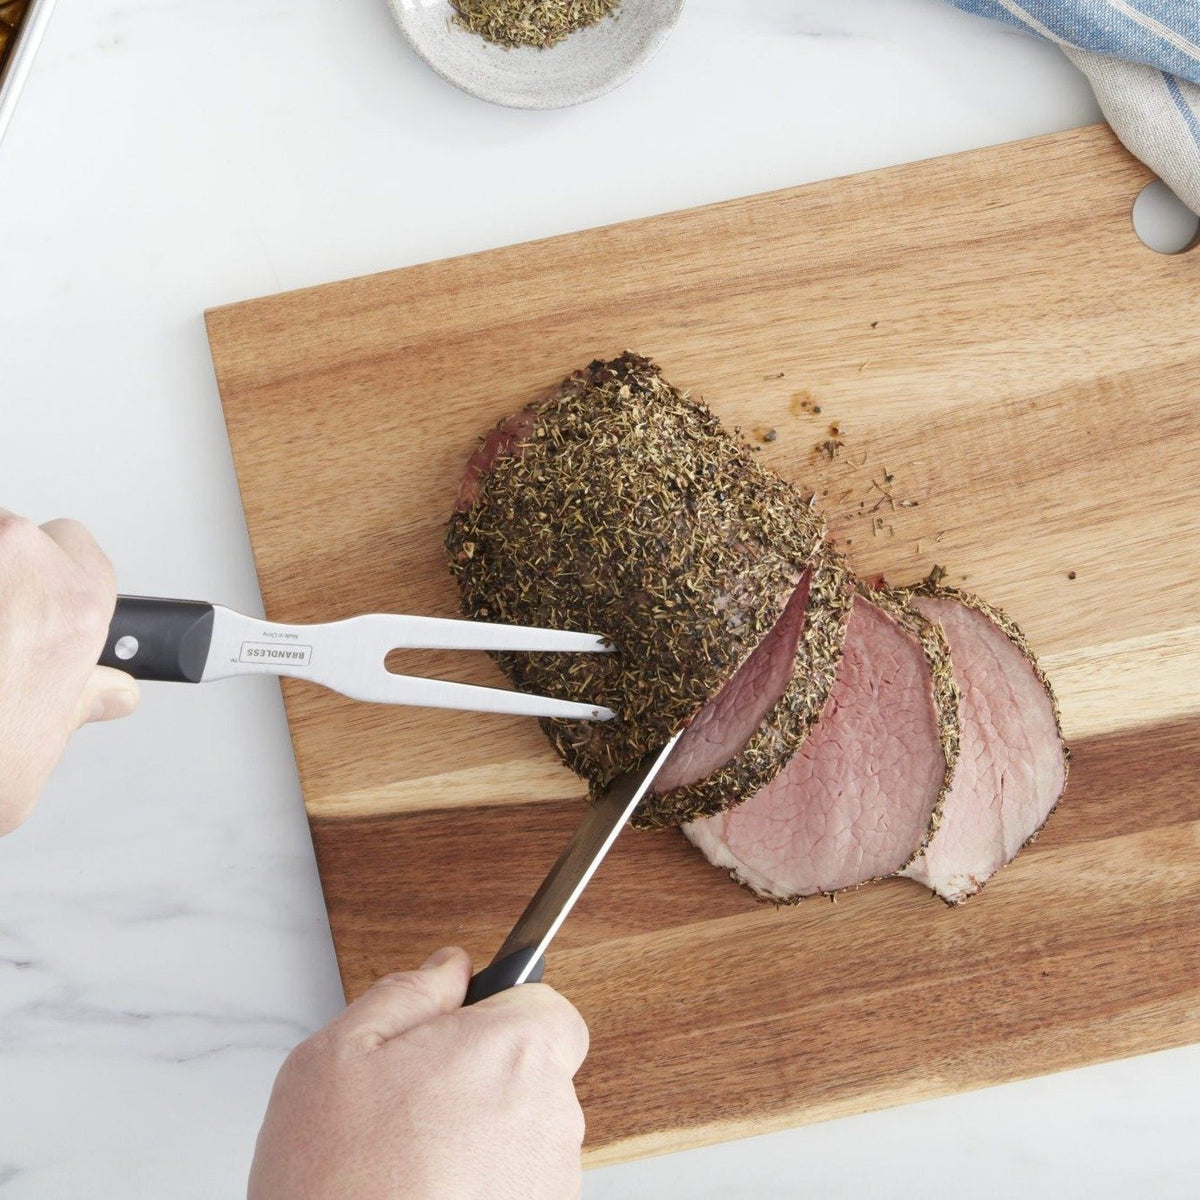 Lifestyle photo, a man&#39;s hands using a carving knife and carving fork to neatly slice a pork loin on a cutting board.